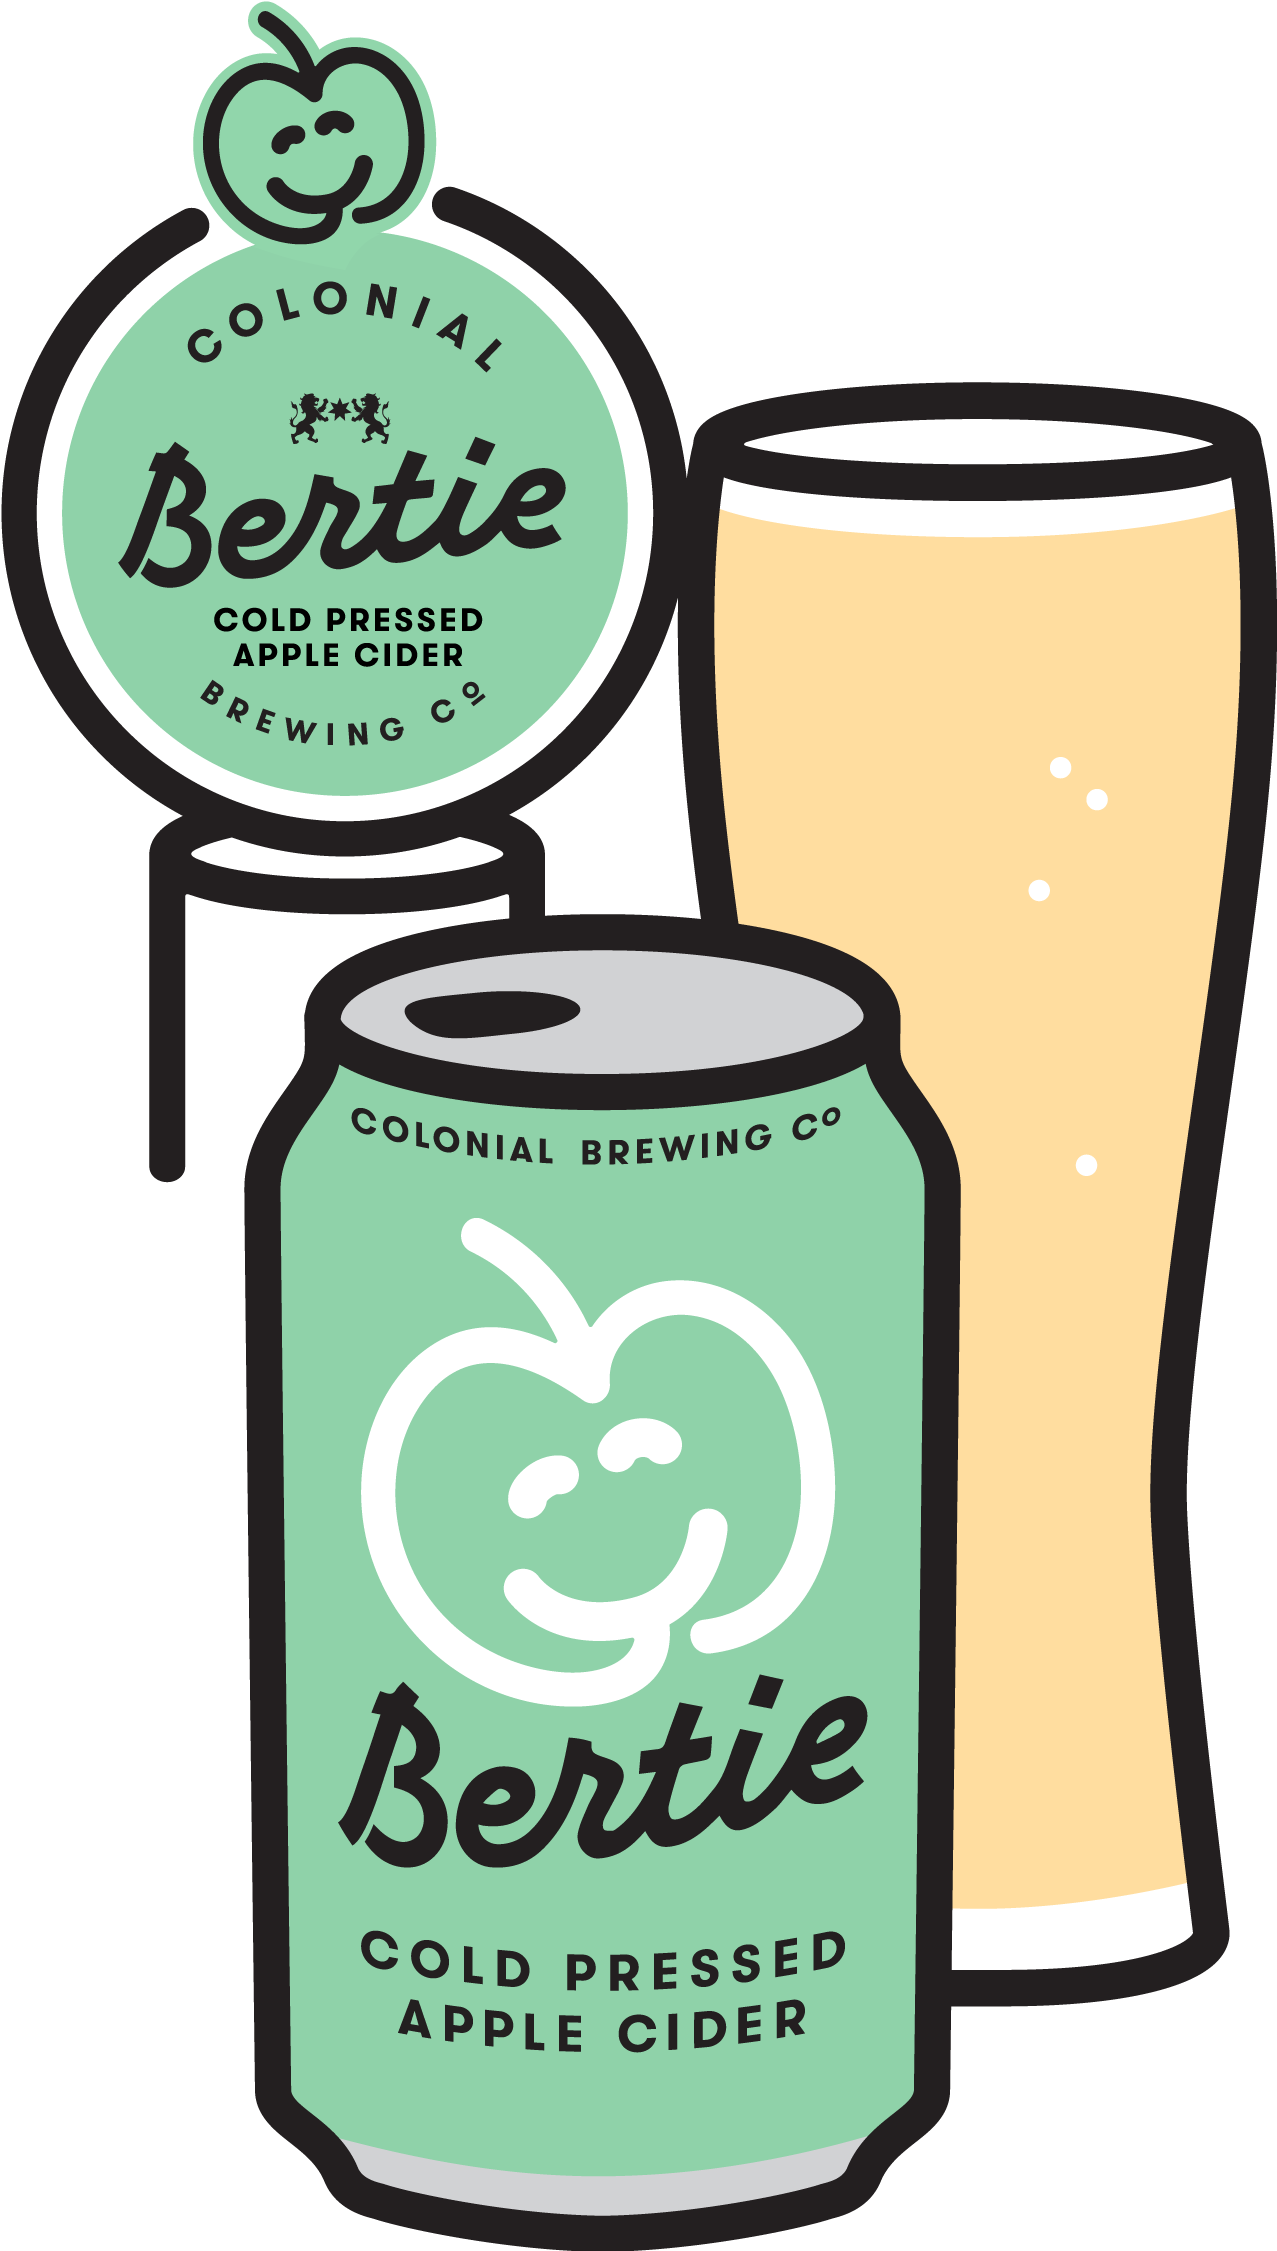 Make It A Bertie With Your Bestie - Make It A Bertie With Your Bestie (1280x2260)